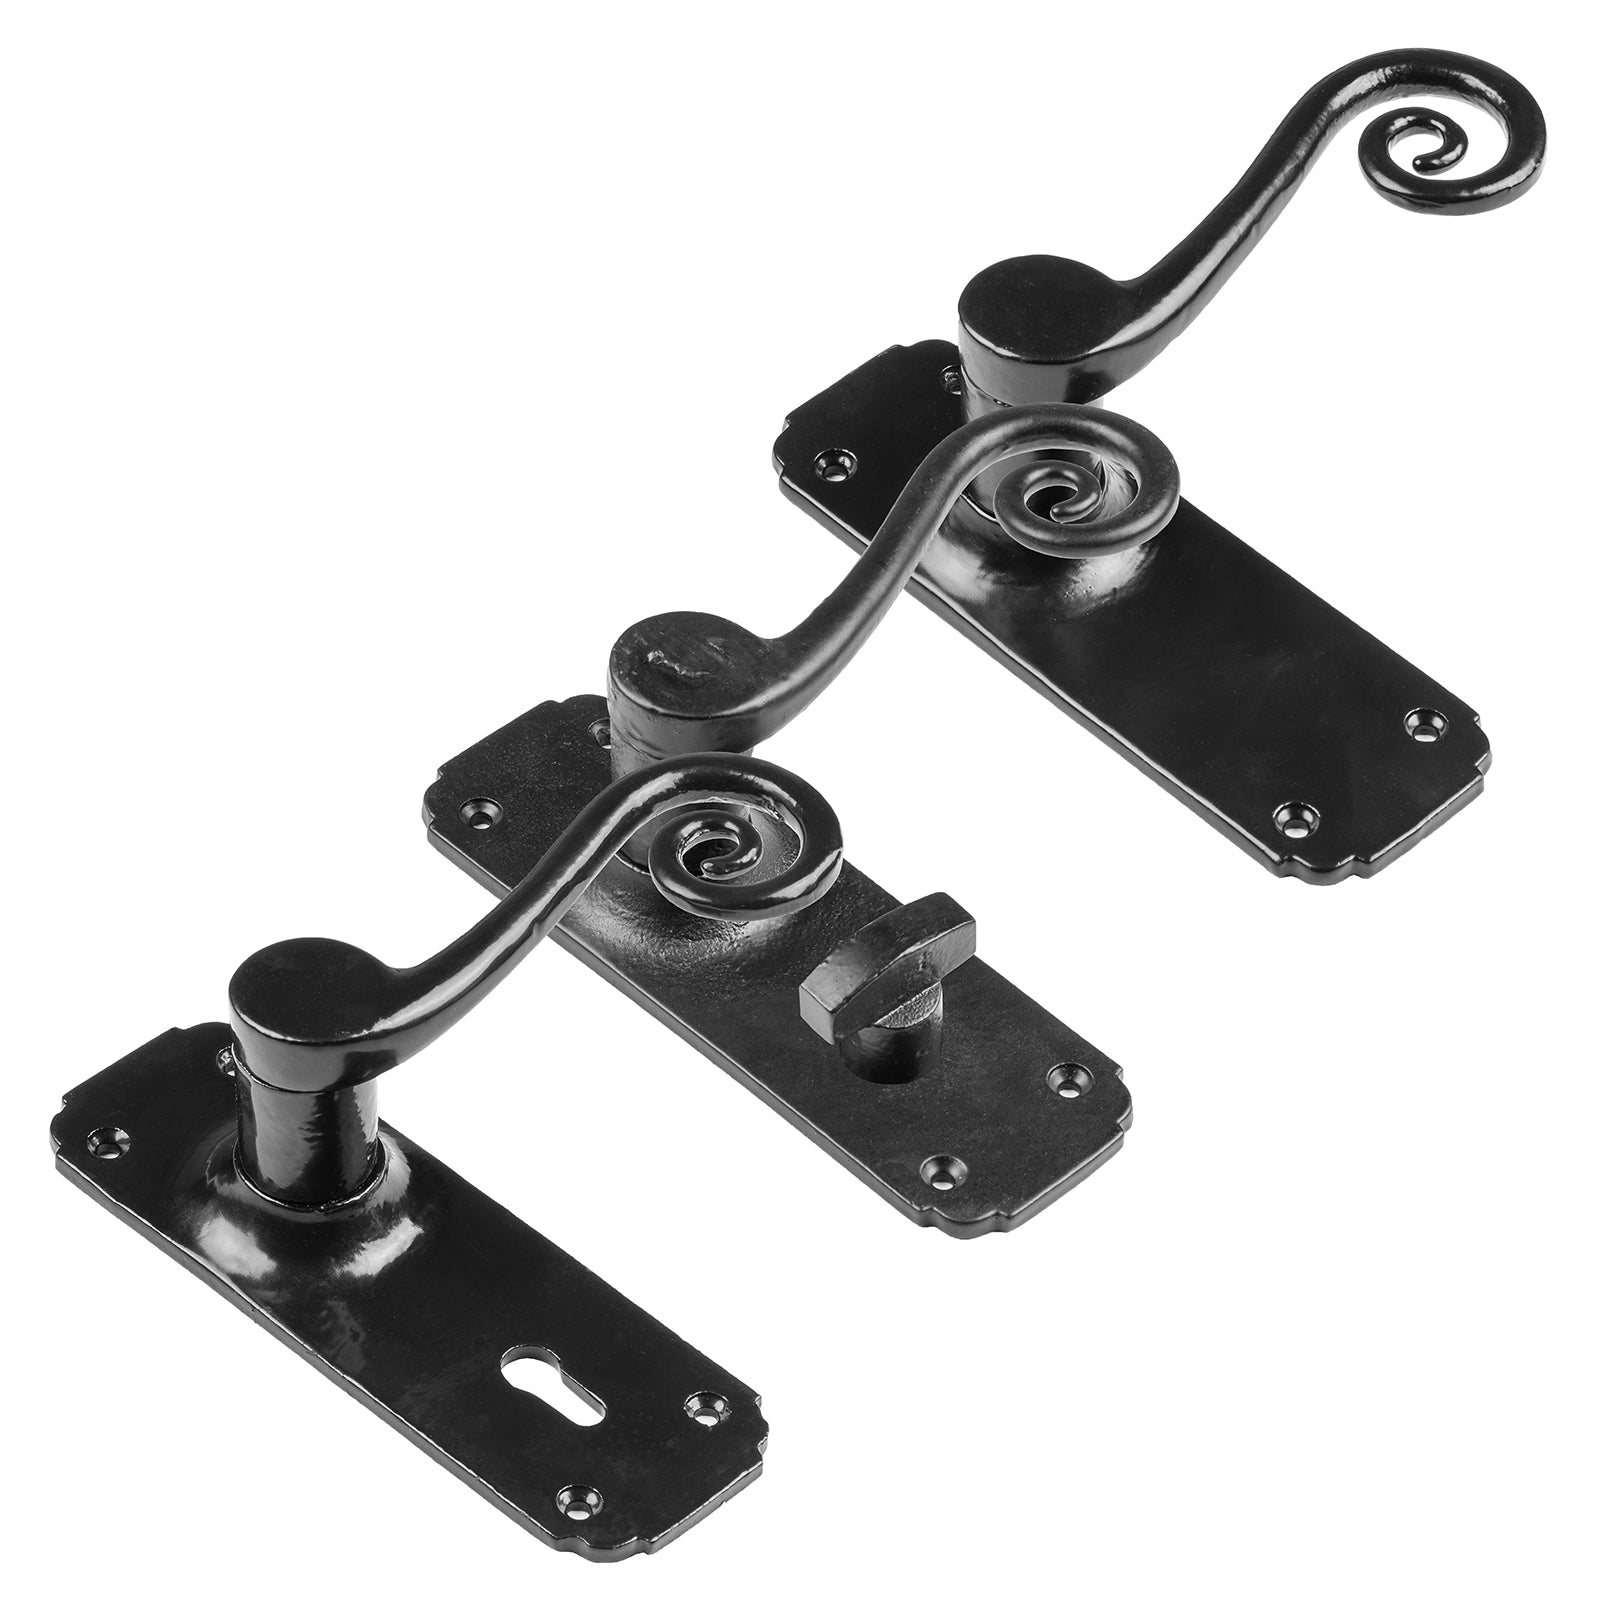 Monkey Tail Lever Handles 